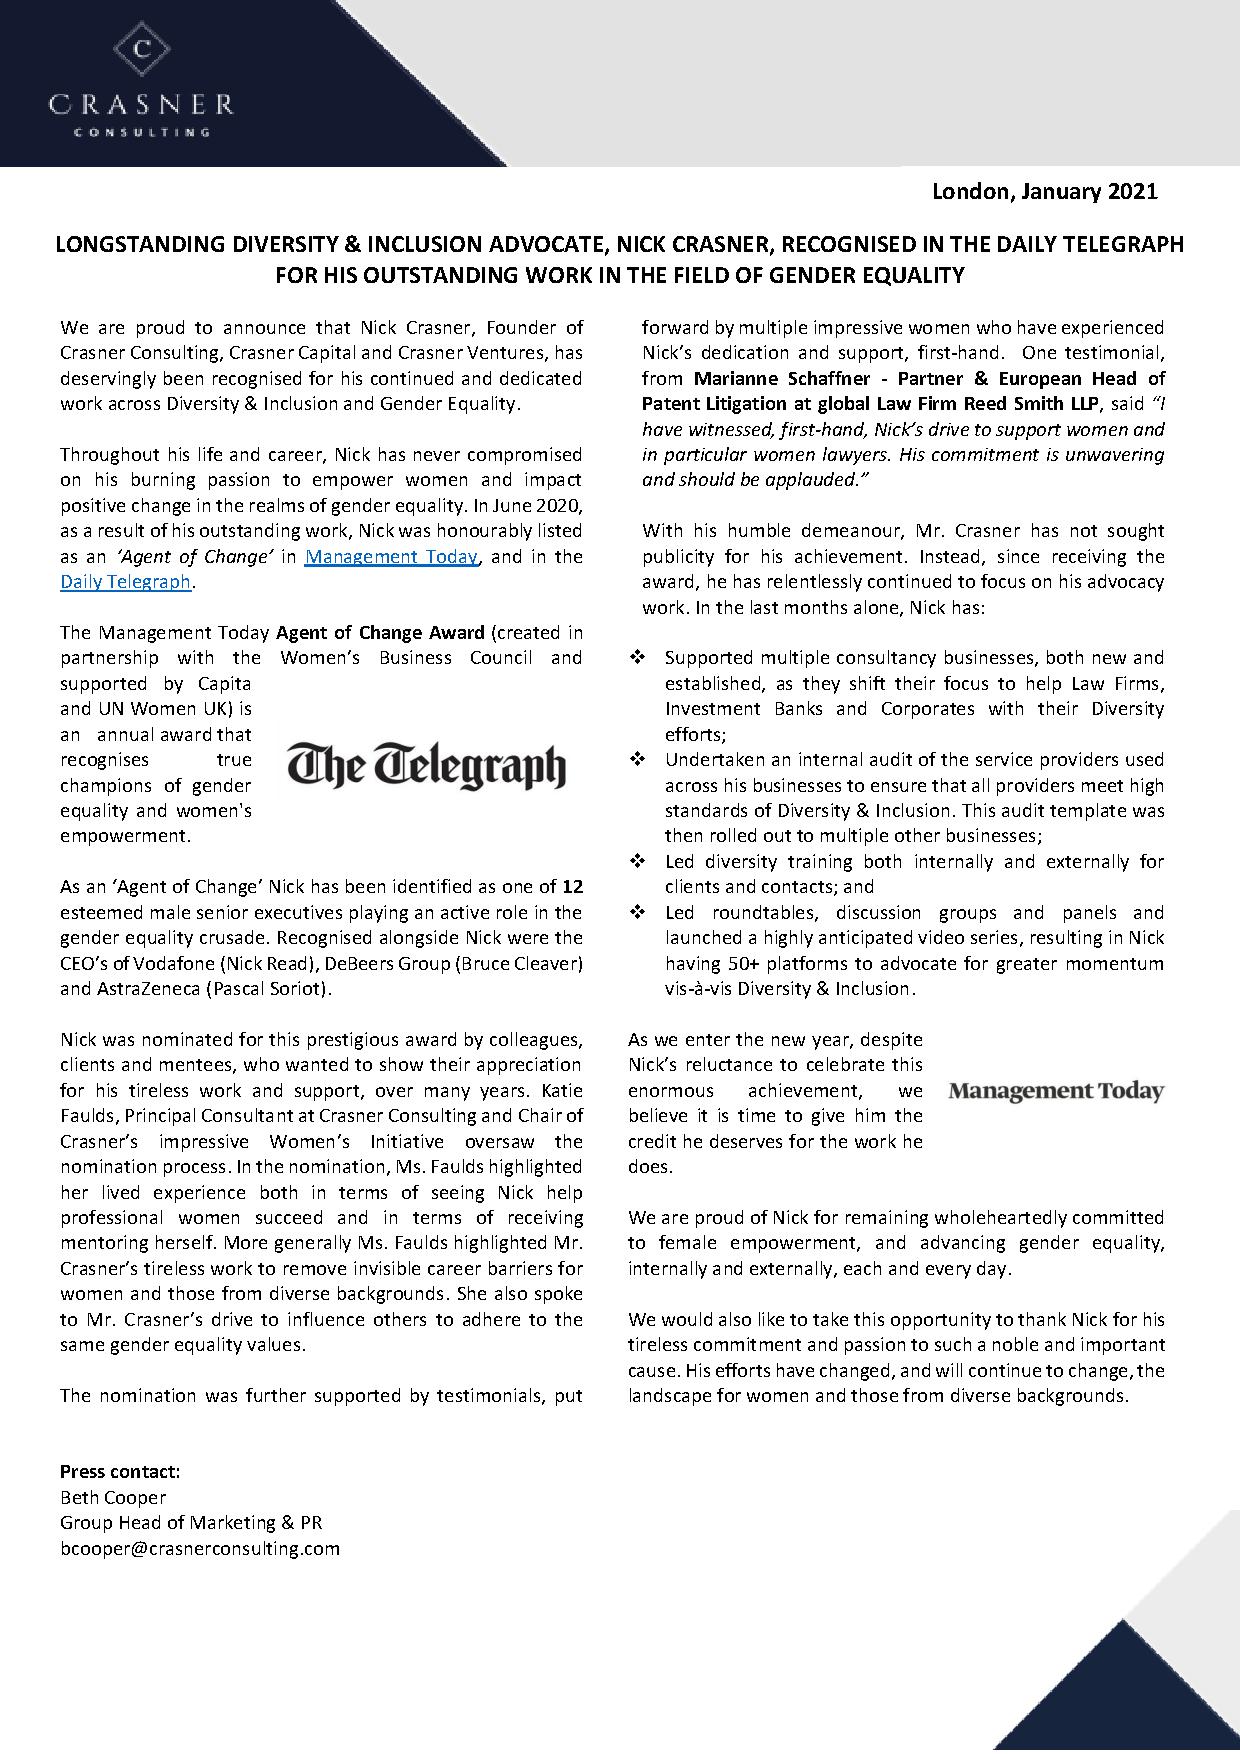 CRASNER CONSULTING PRESS RELEASE LONGSTANDING DIVERSITY & INCLUSION ADVOCATE, NICK CRASNER, RECOGNISED IN THE DAILY TELEGRAPH FOR HIS OUTSTANDING WORK IN THE FIELD OF GENDER EQUALITY copy